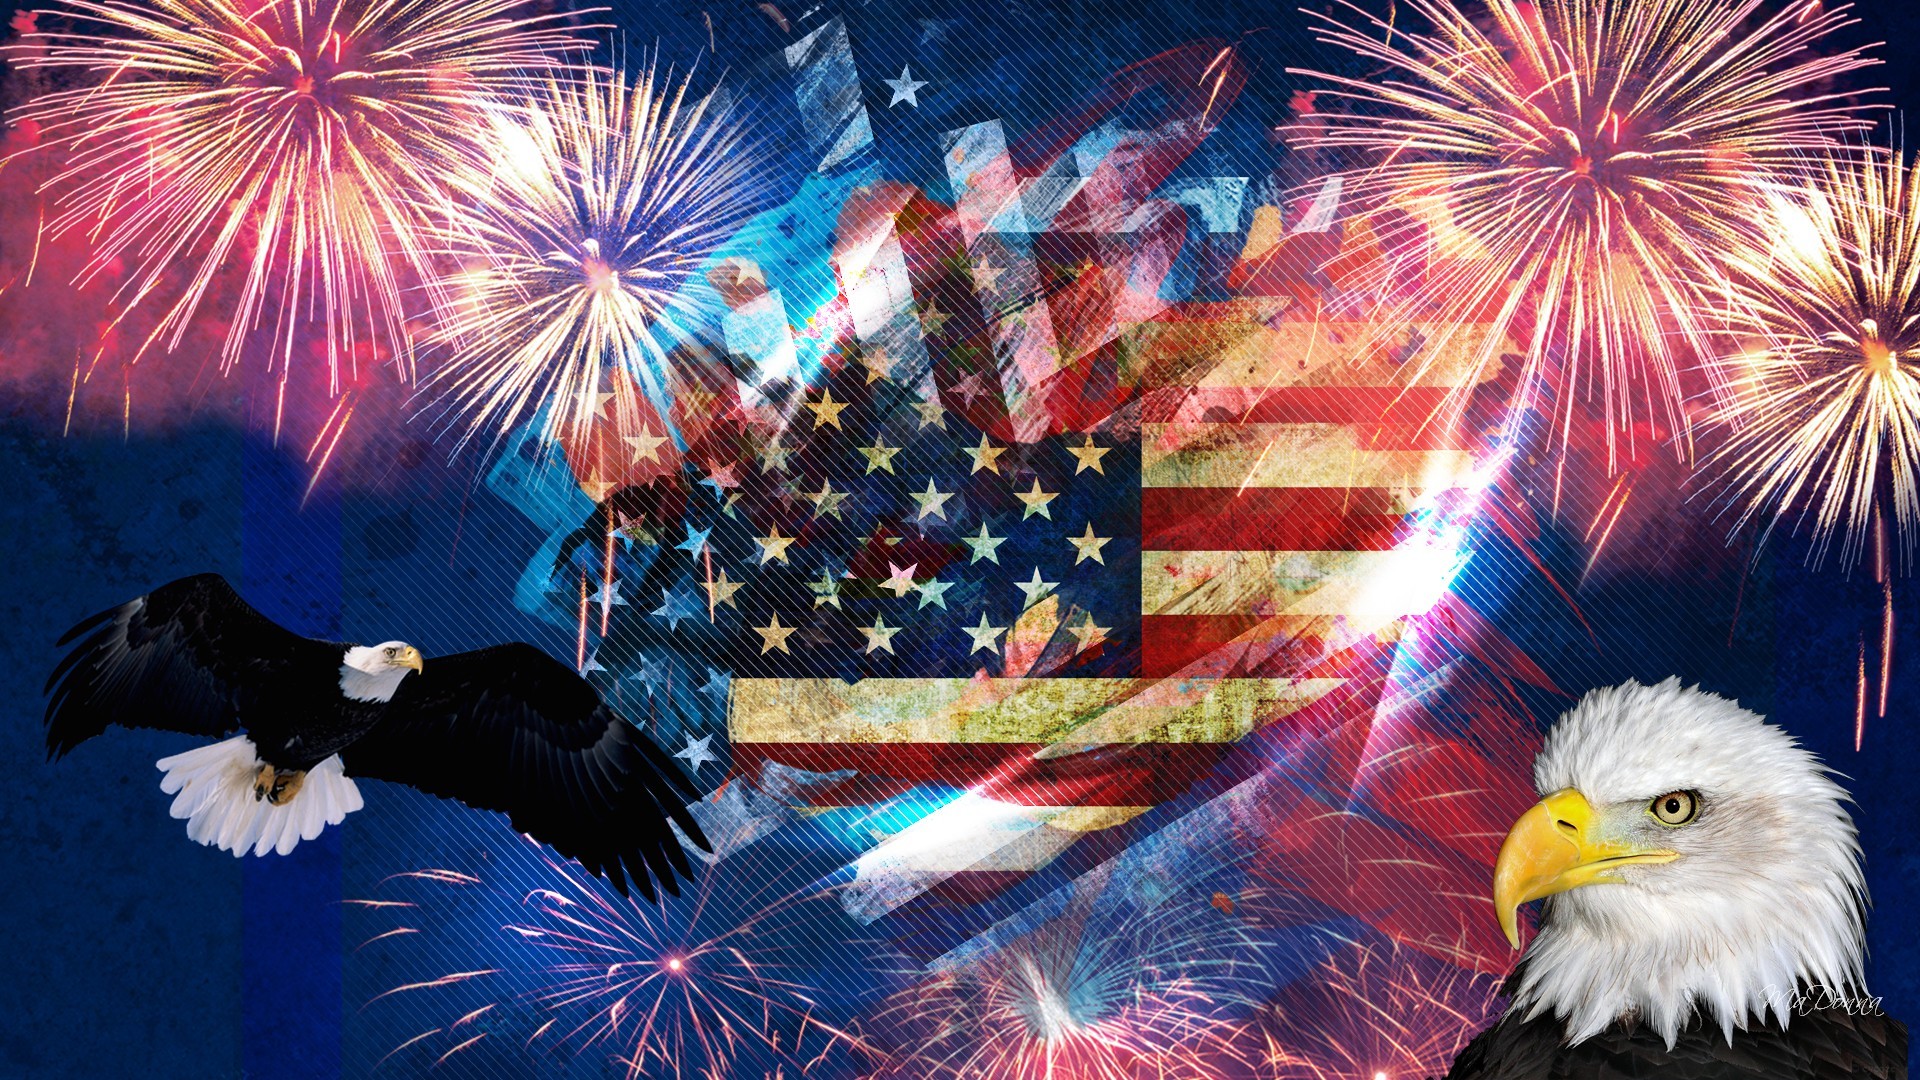 1920x1080 4th of july wallpaper hd desktop wallpapers high definition amazing  background photos download best apple display